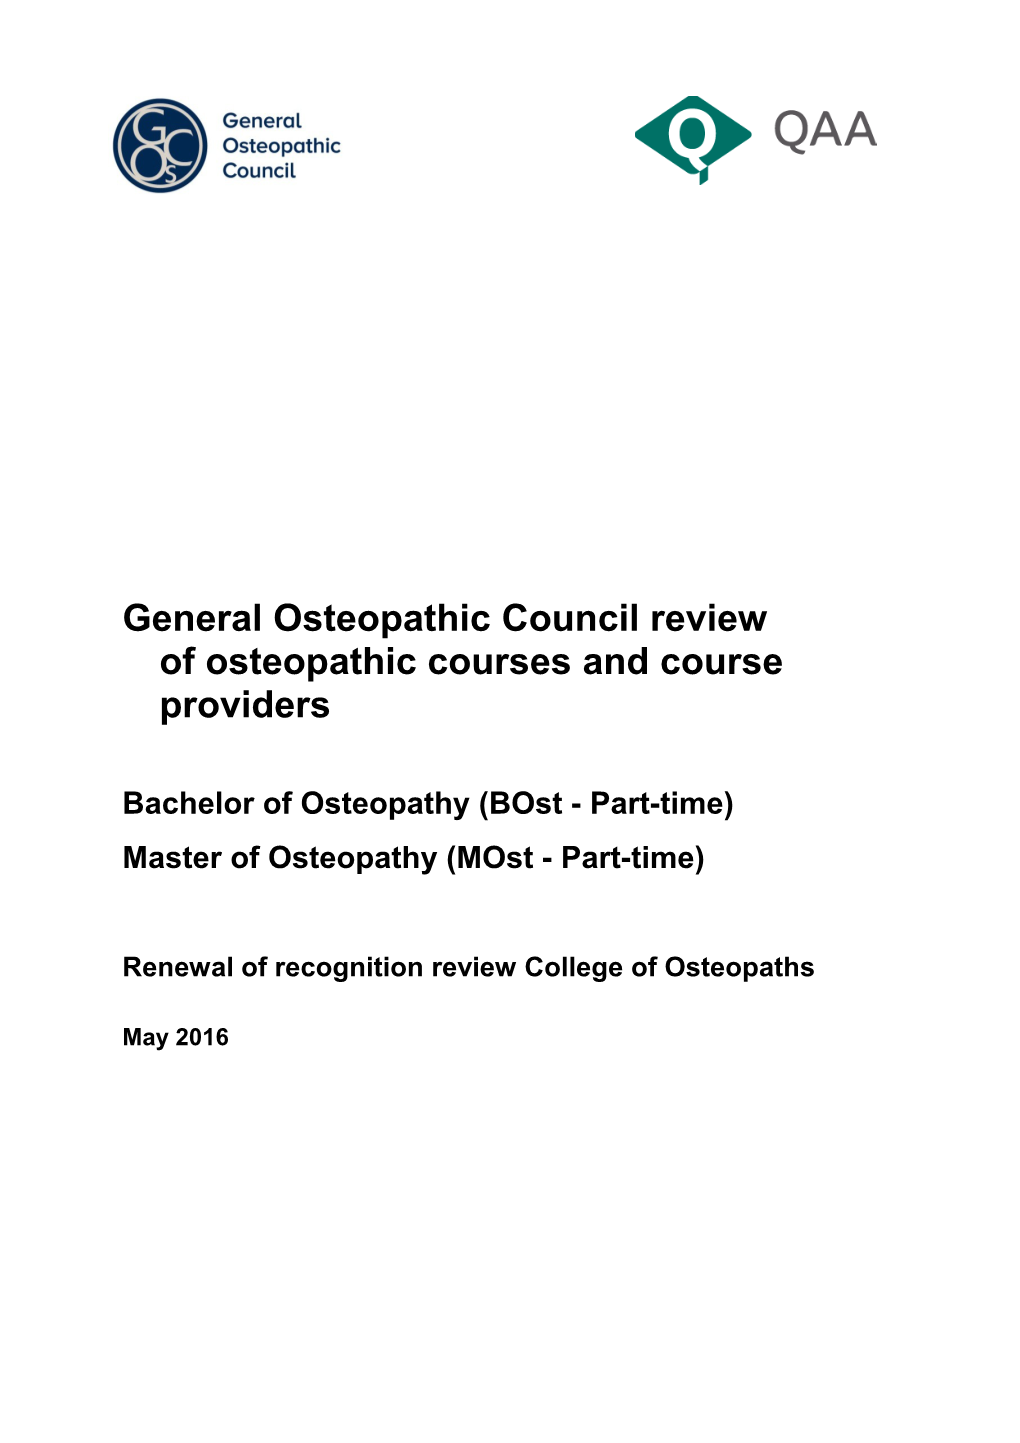 General Osteopathic Council Review of Osteopathic Courses and Course Providers